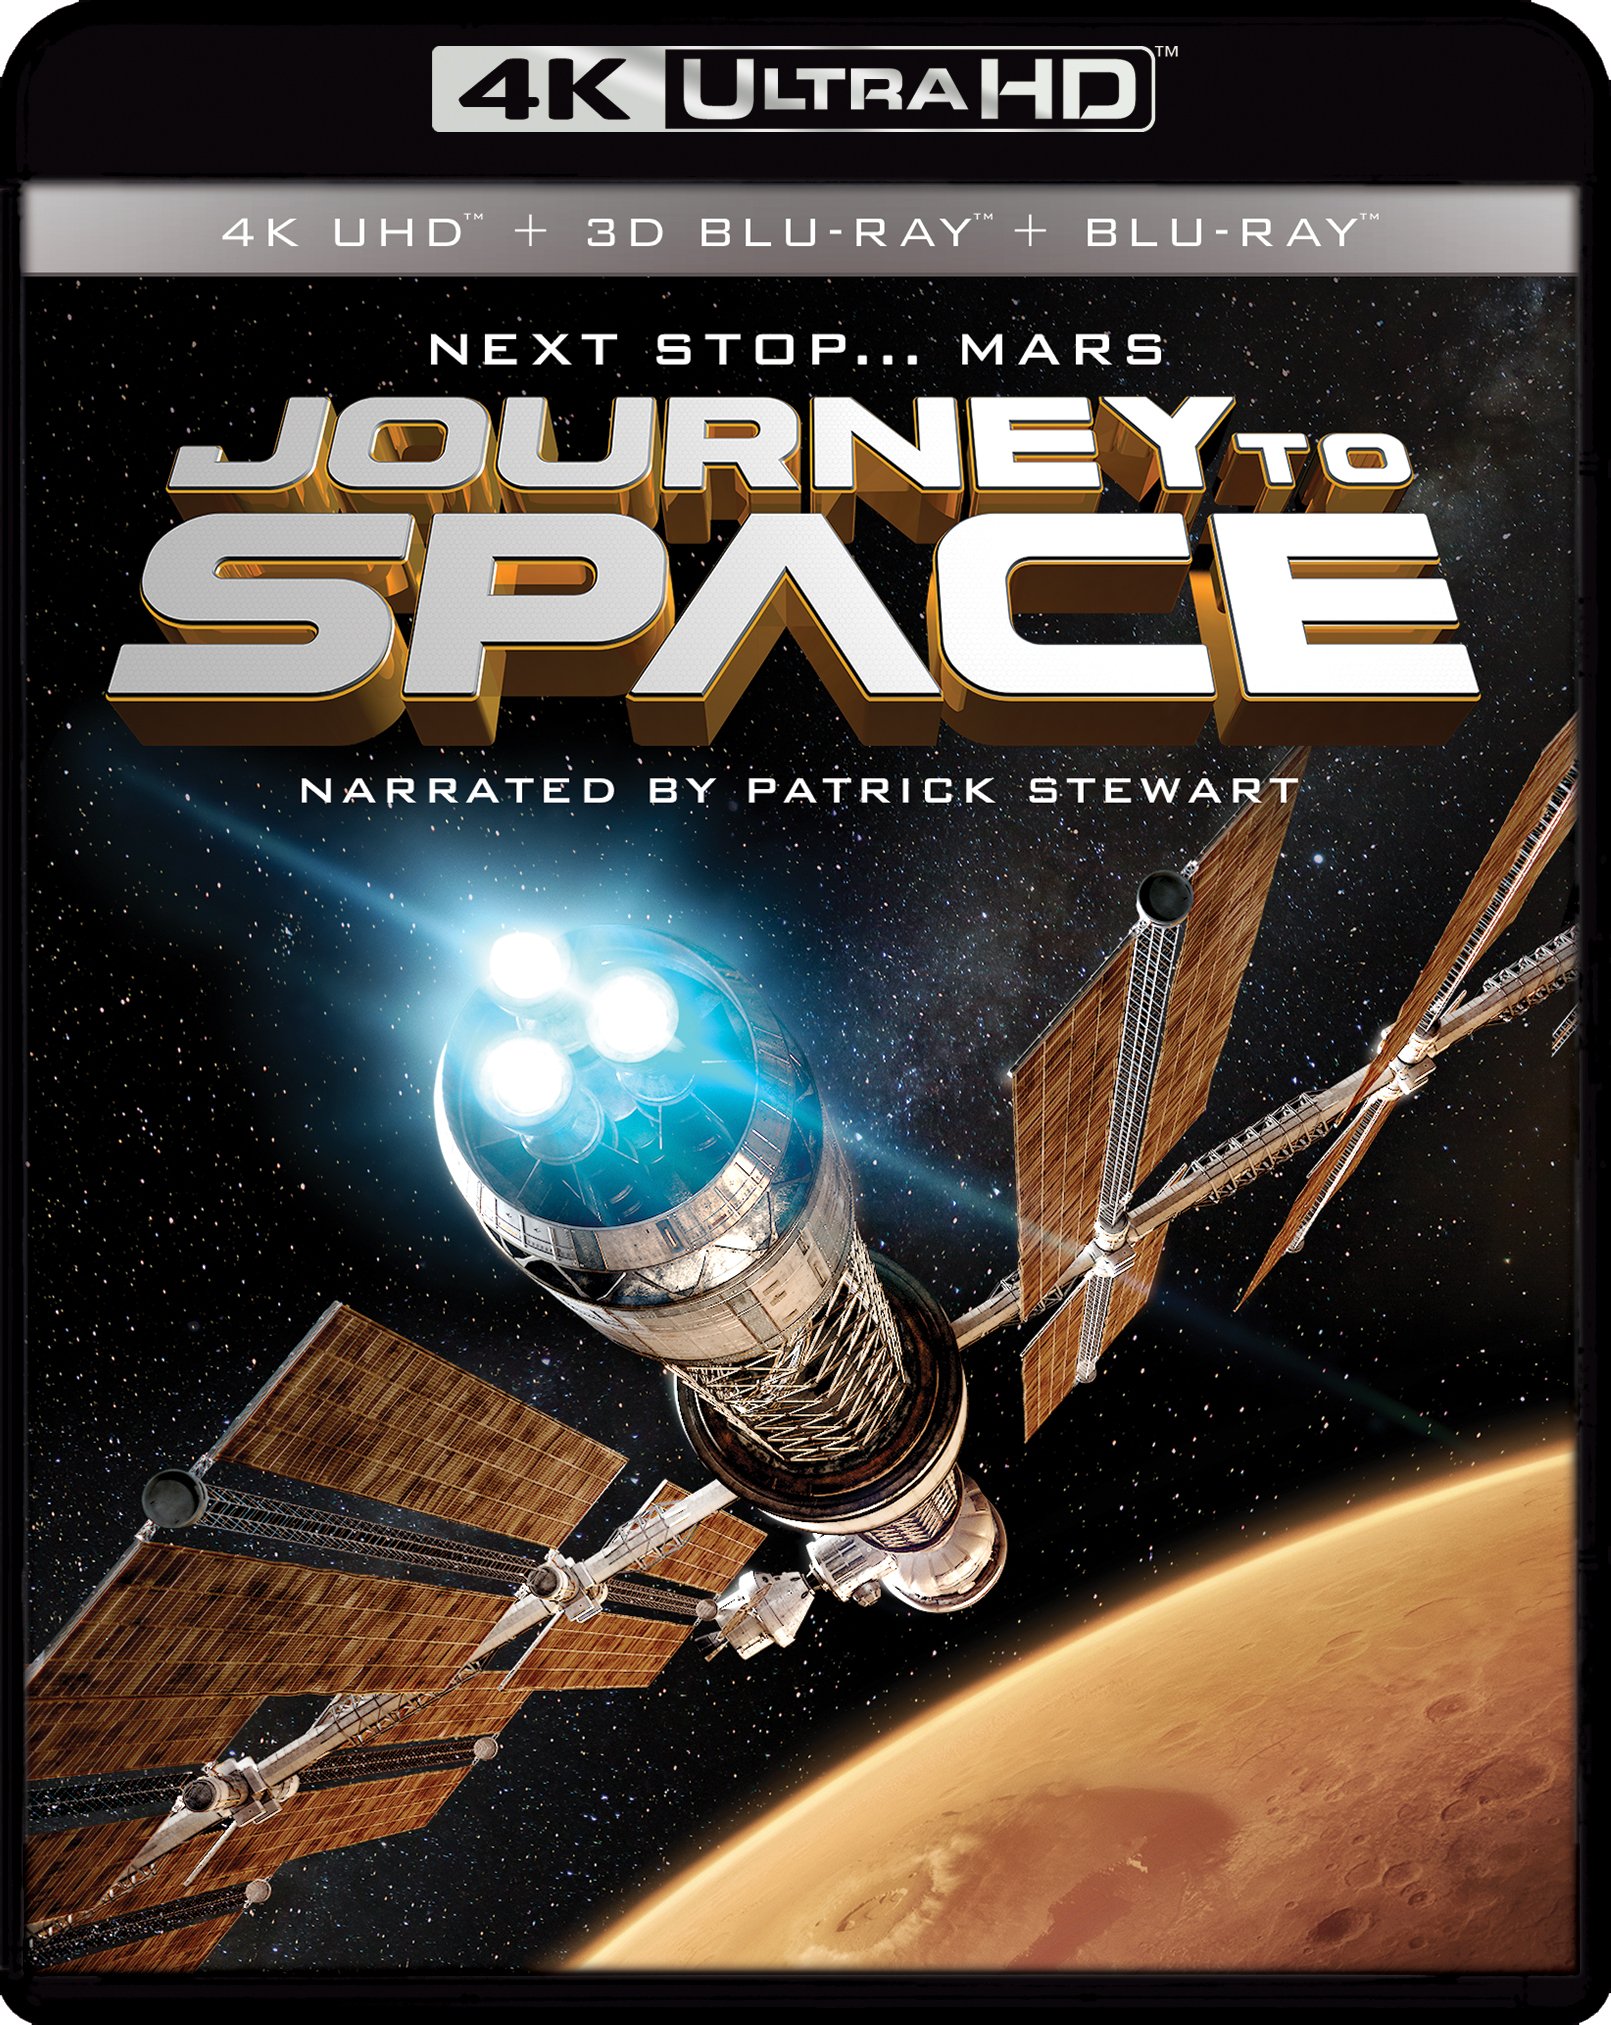 IMAX Journey to Space DVD Release Date June 7, 2016